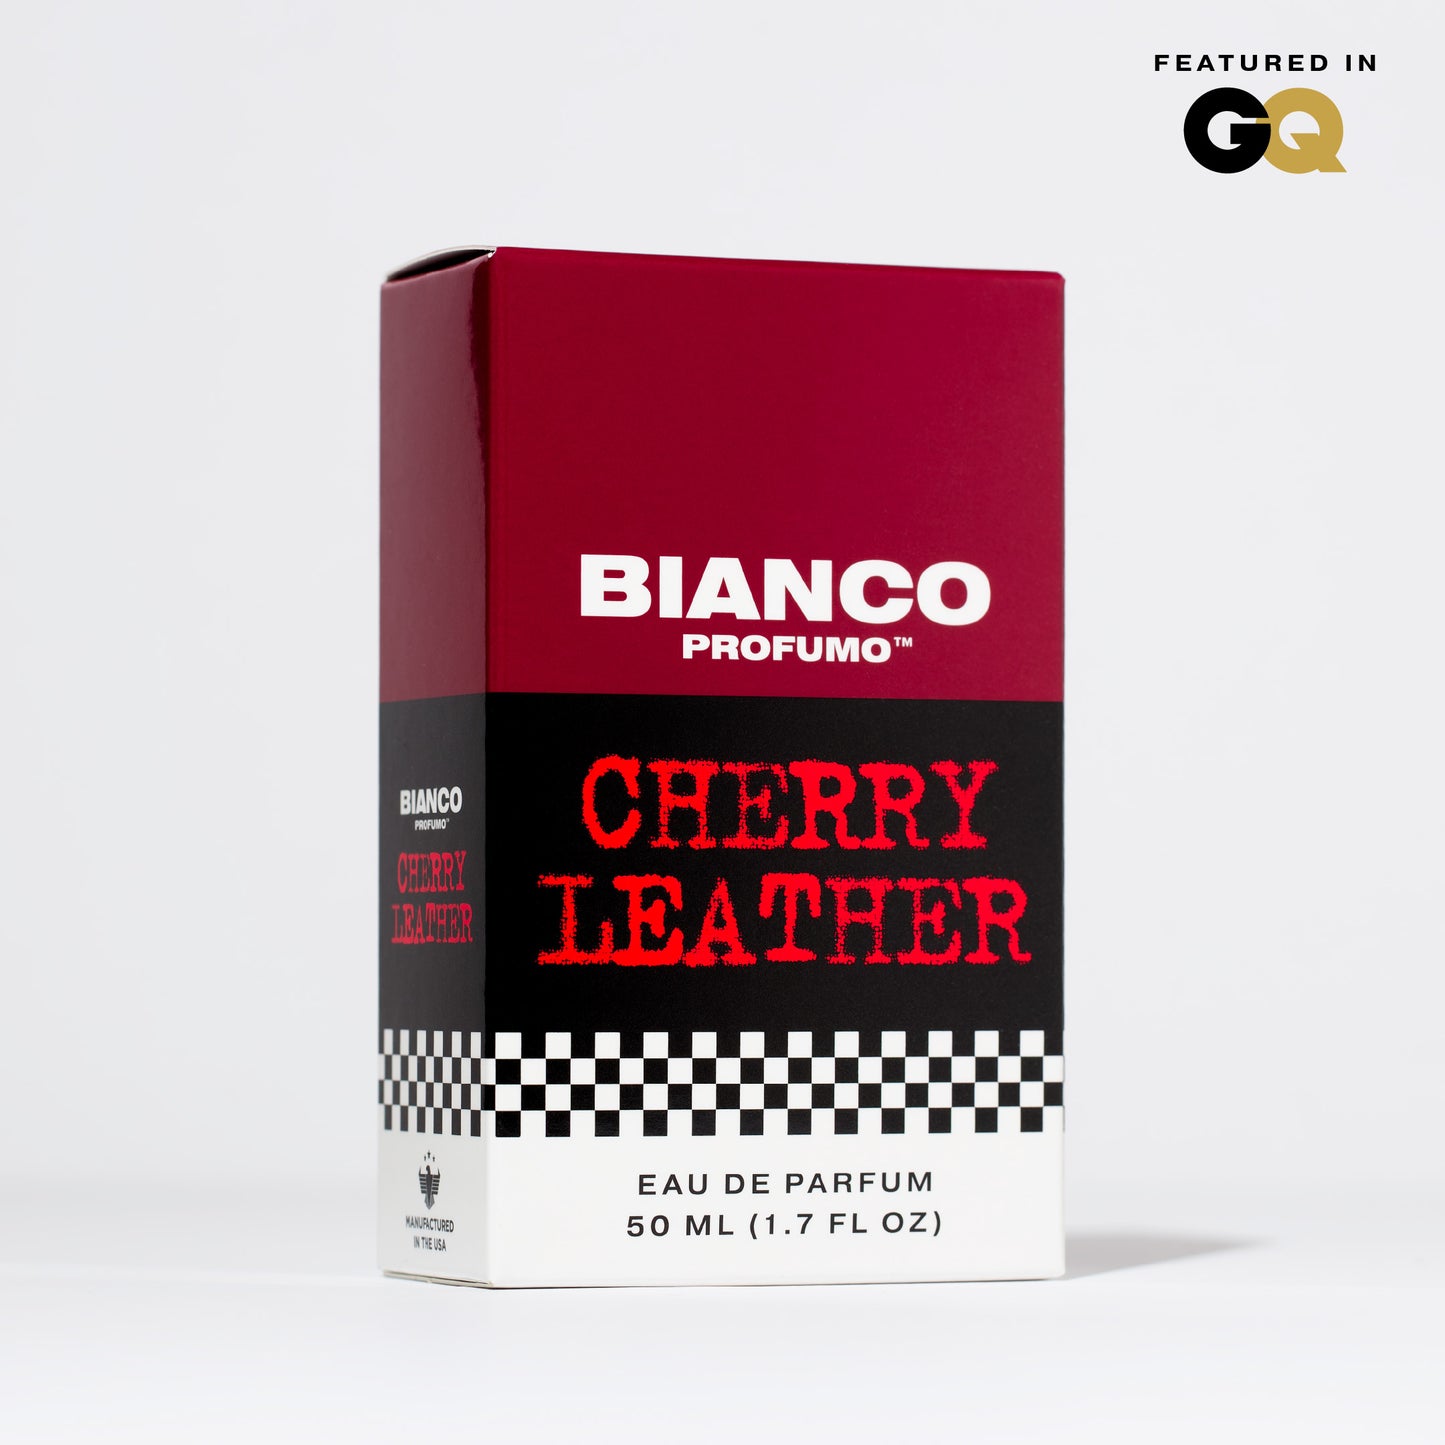 Bianco Profumo Cherry Leather with notes of Bitter Fennel, Star Anise, Black Pepper, Saffron, Ambrette Seed, Cherry, Bitter Almond, Guaiacwood, Pine Tar, Suede, Amber, Oakwood, Moss, and Musk. Box on clean white background.